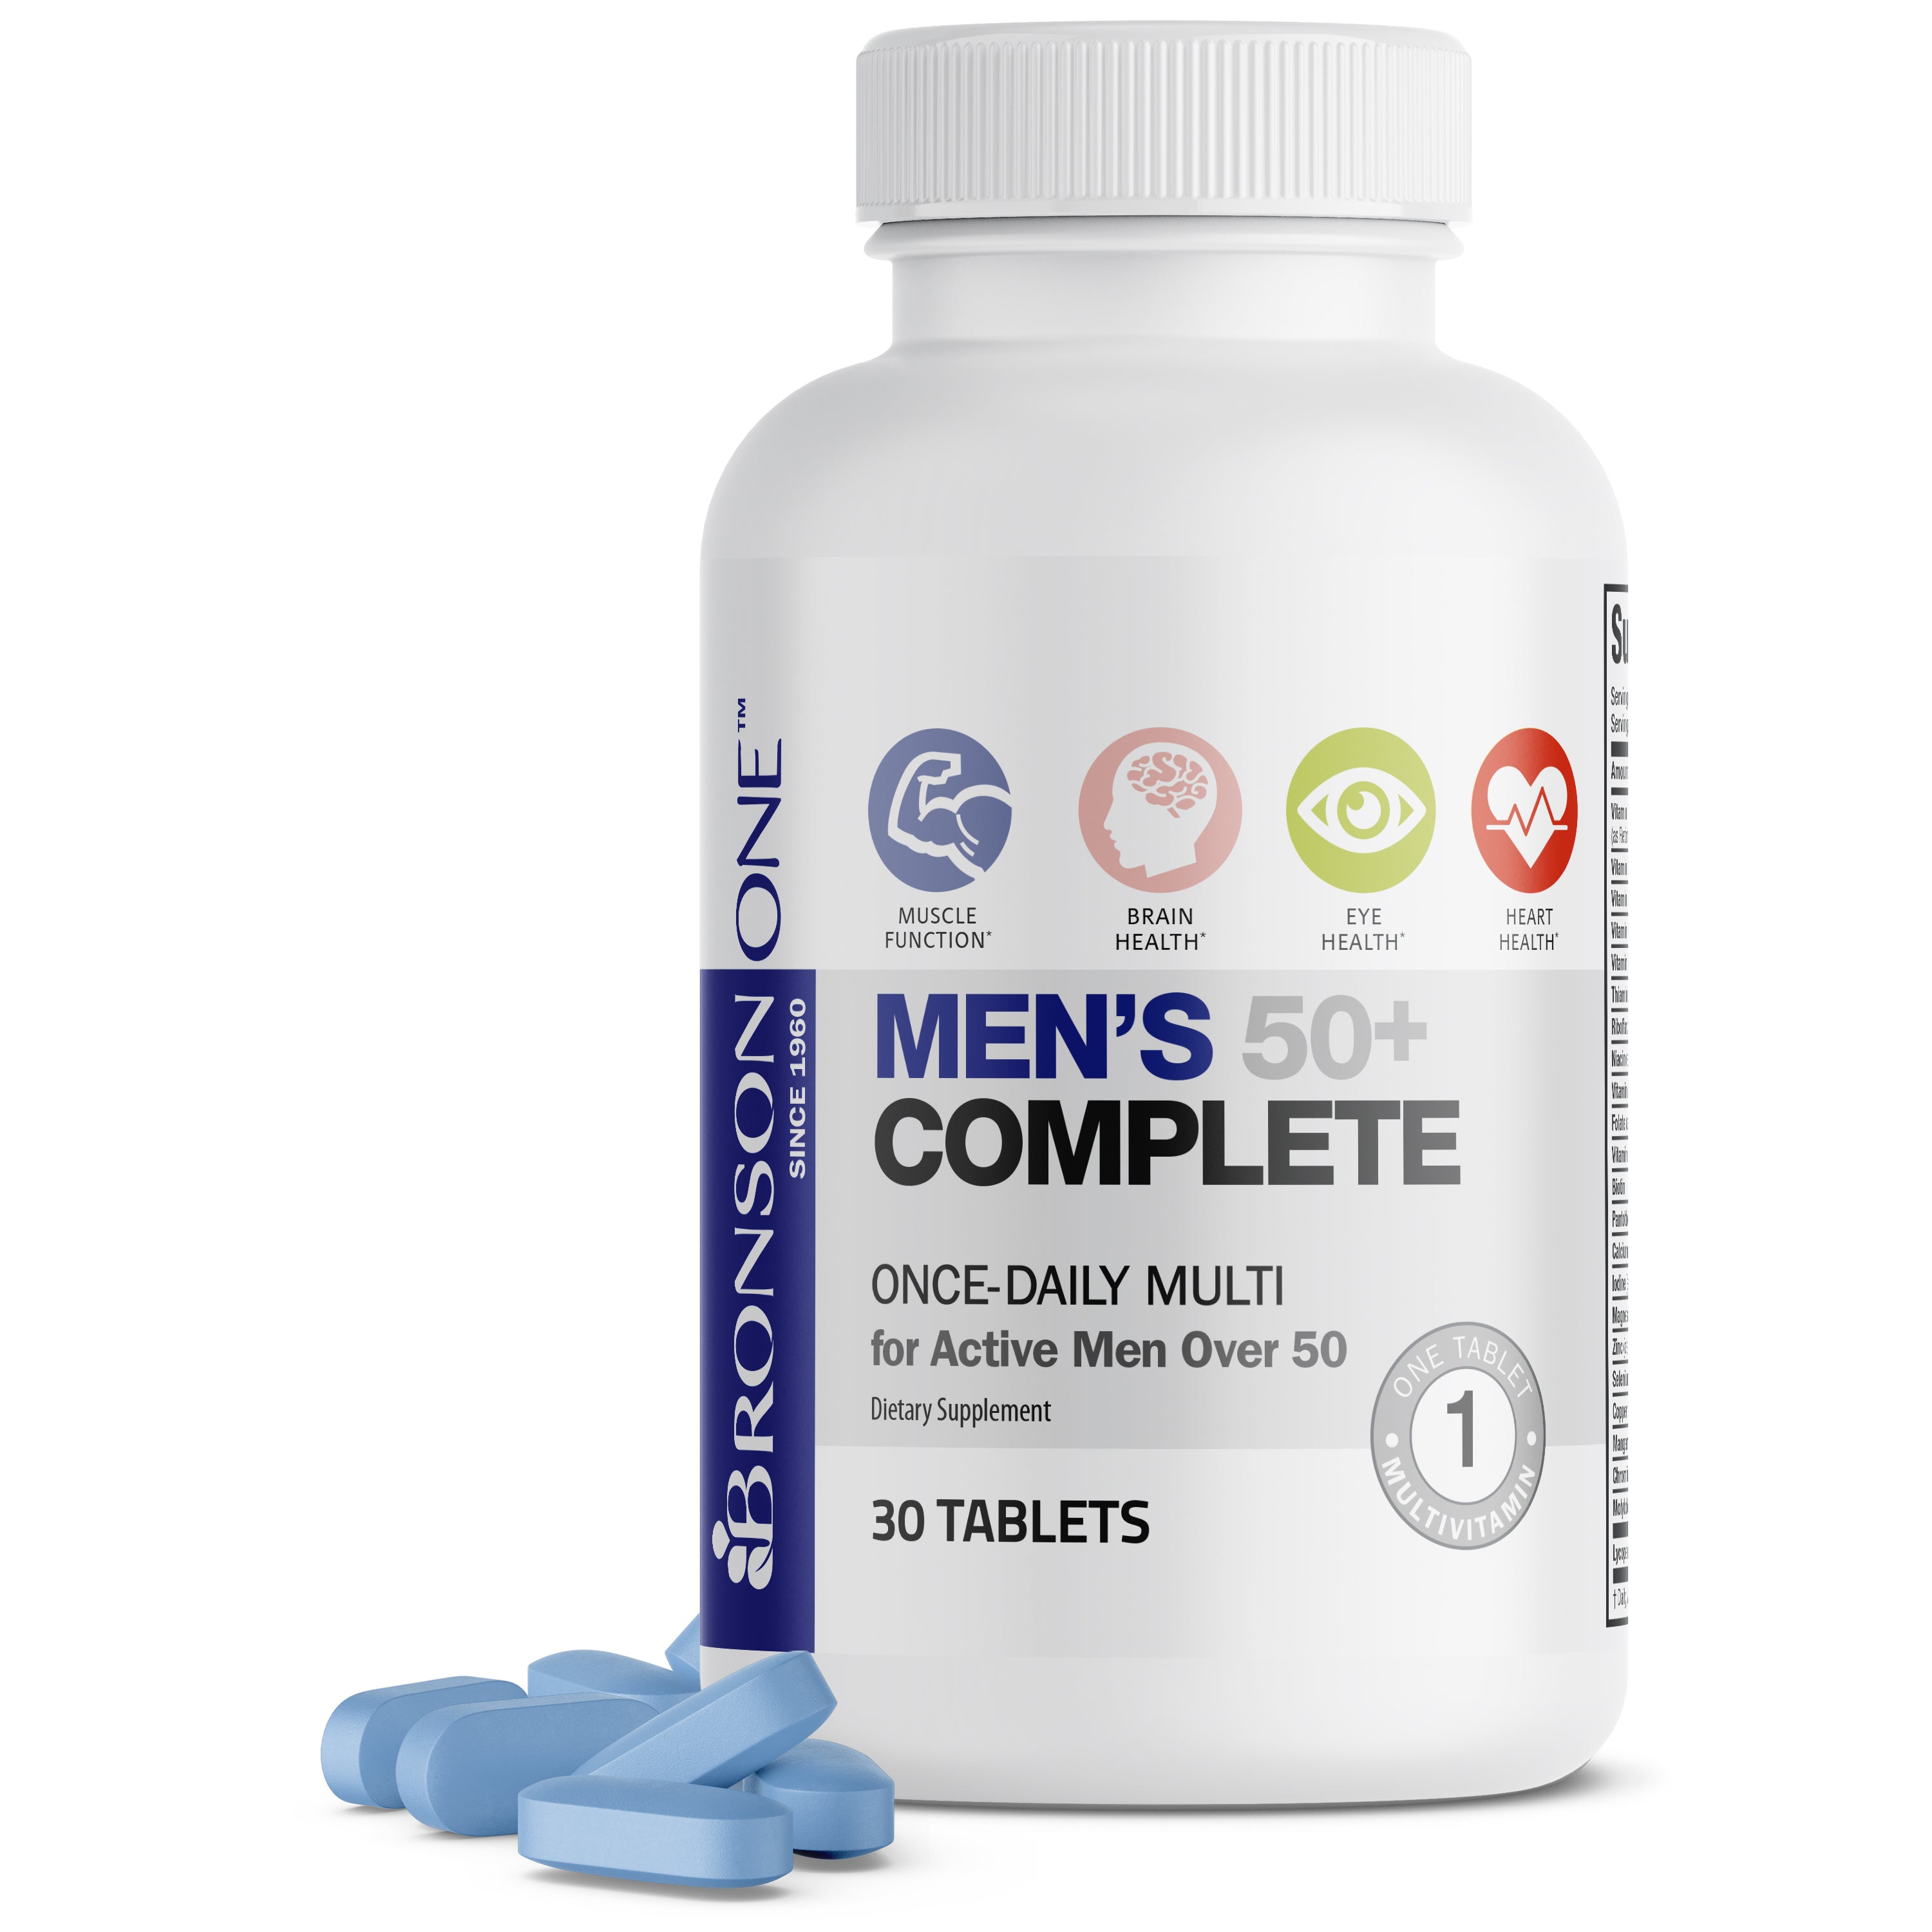 Bronson ONE™ Men's 50+ Complete Once-Daily Multivitamin view 1 of 6